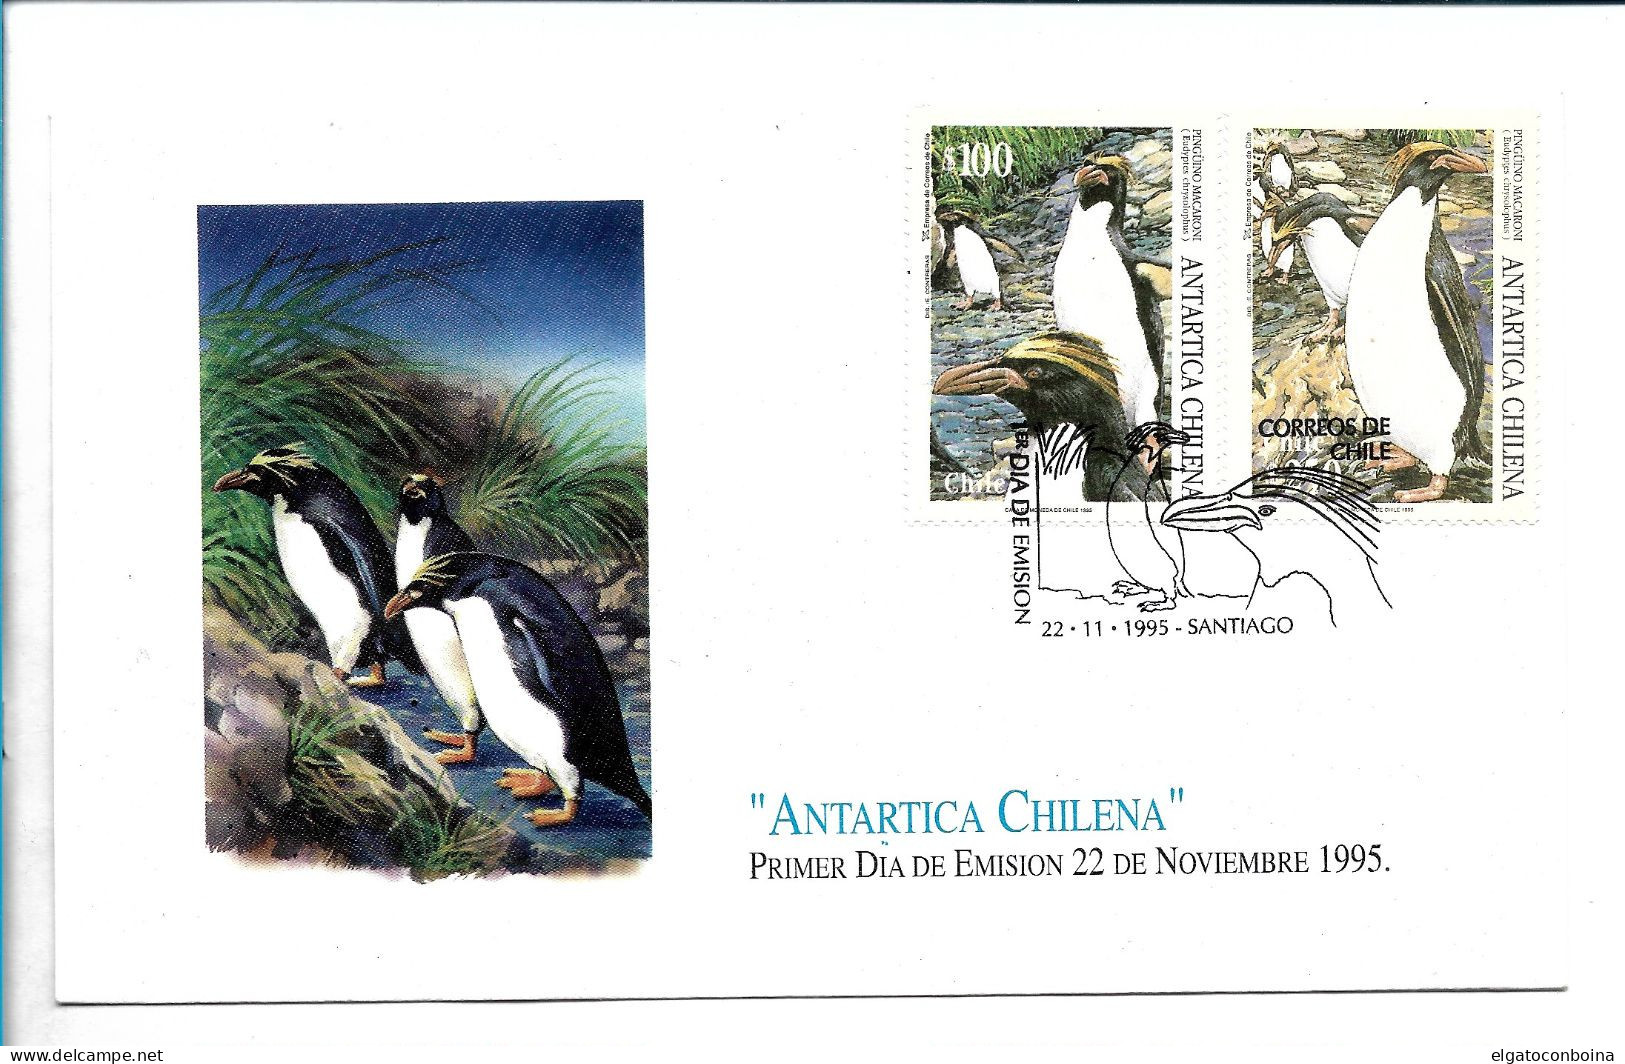 CHILE 1995 FDC CHILEAN ANTARCTICS TERRITORY PENGUINS FAUNA FIRST DAY COVER - Chile